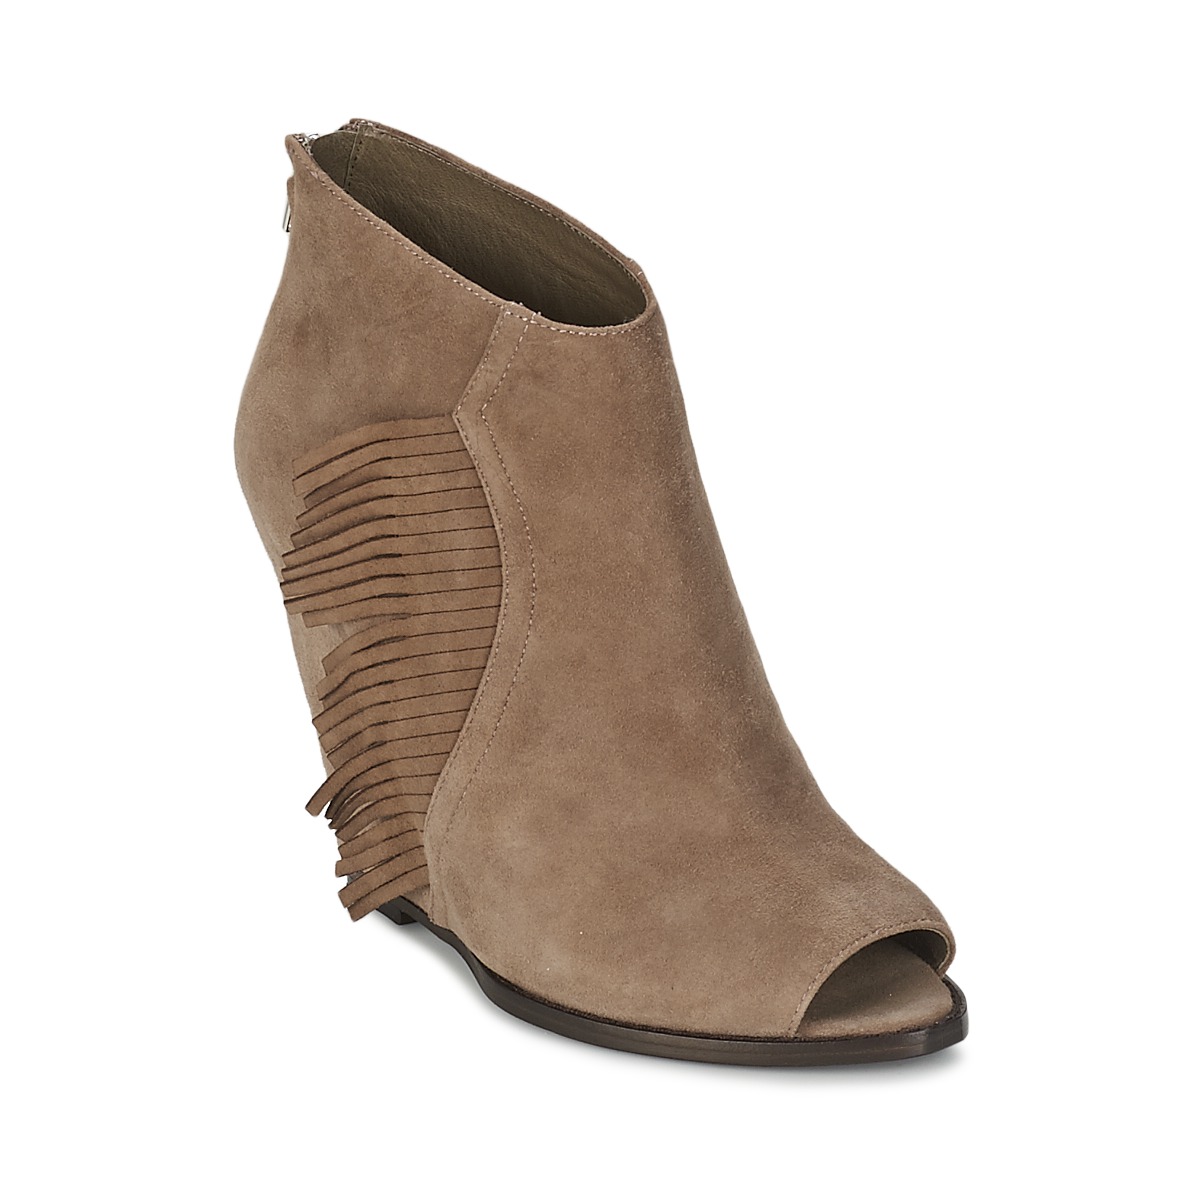 Shoes Women Ankle boots Ash LYNX Taupe